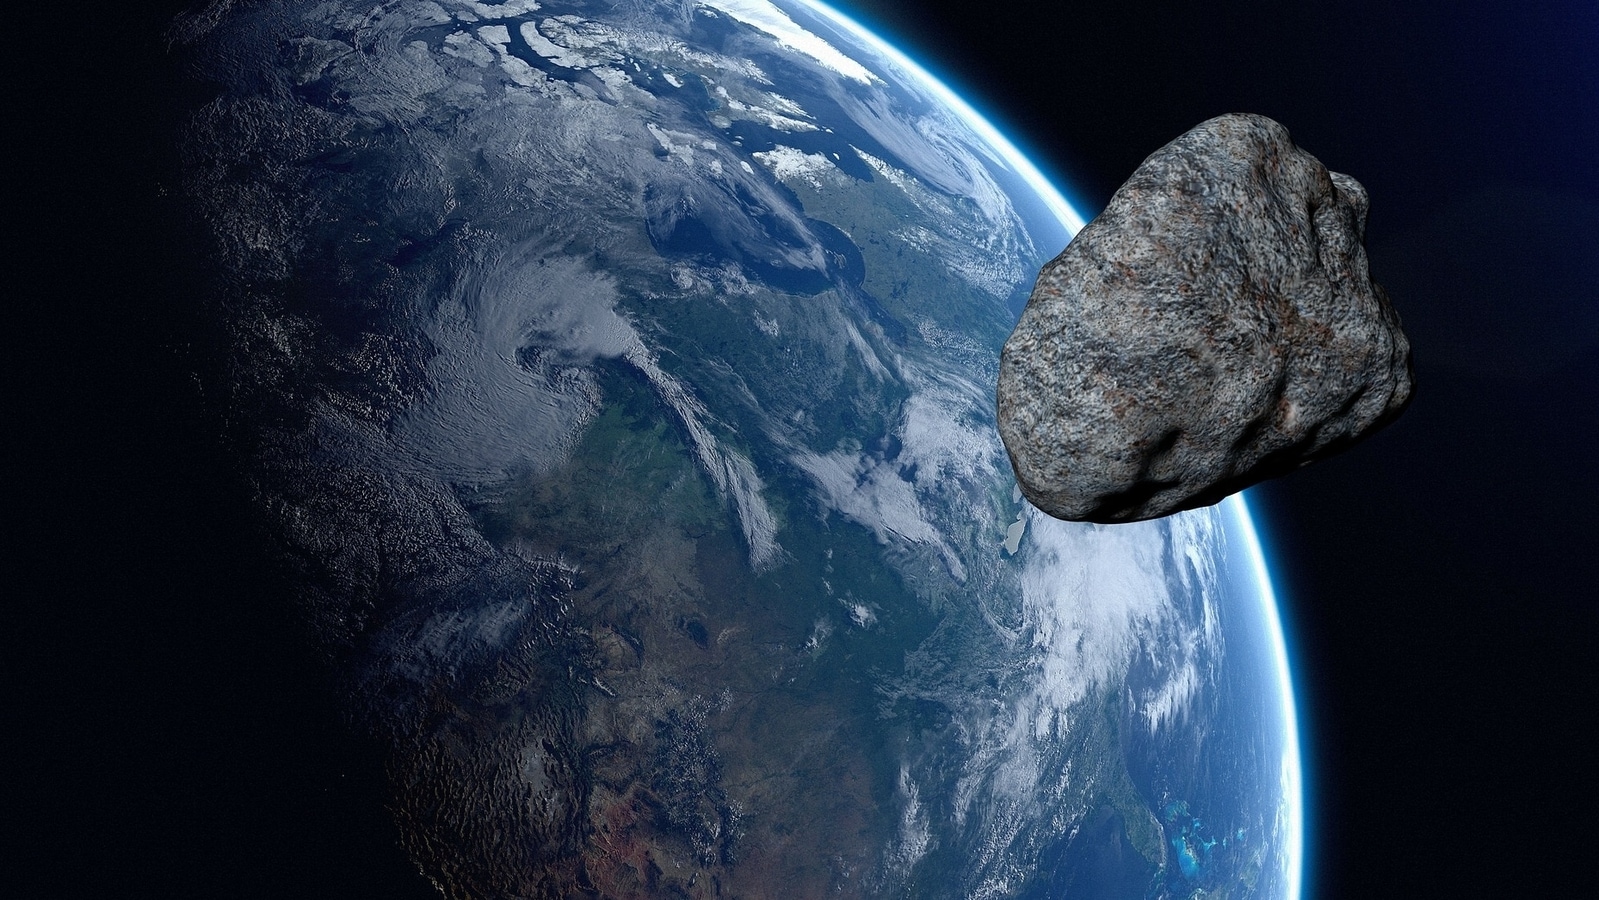 NASA asteroid warning! Plane-sized asteroid headed for Earth today, 10-10-2022